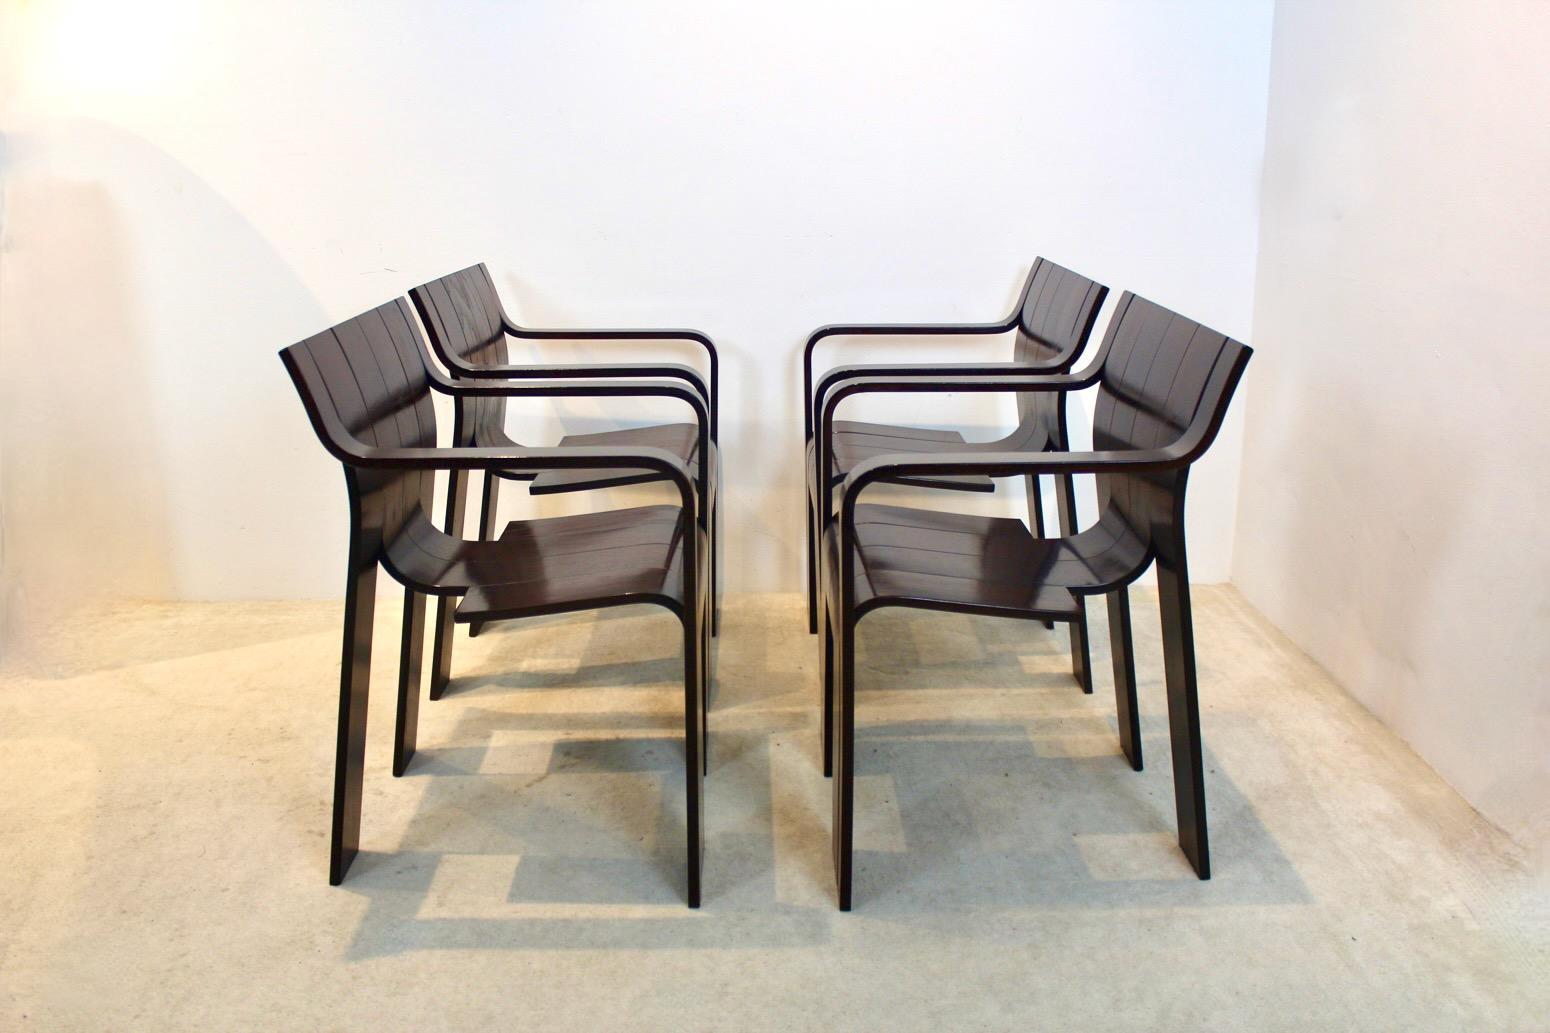 Very rare set of ‘Strip’ dining chairs with armrests, designed in 1974 by Gijs Bakker for Castelijn in the Netherlands (marked). Only a limited amount of these chairs were made with armrests. This inventive design consists of six curved strips that